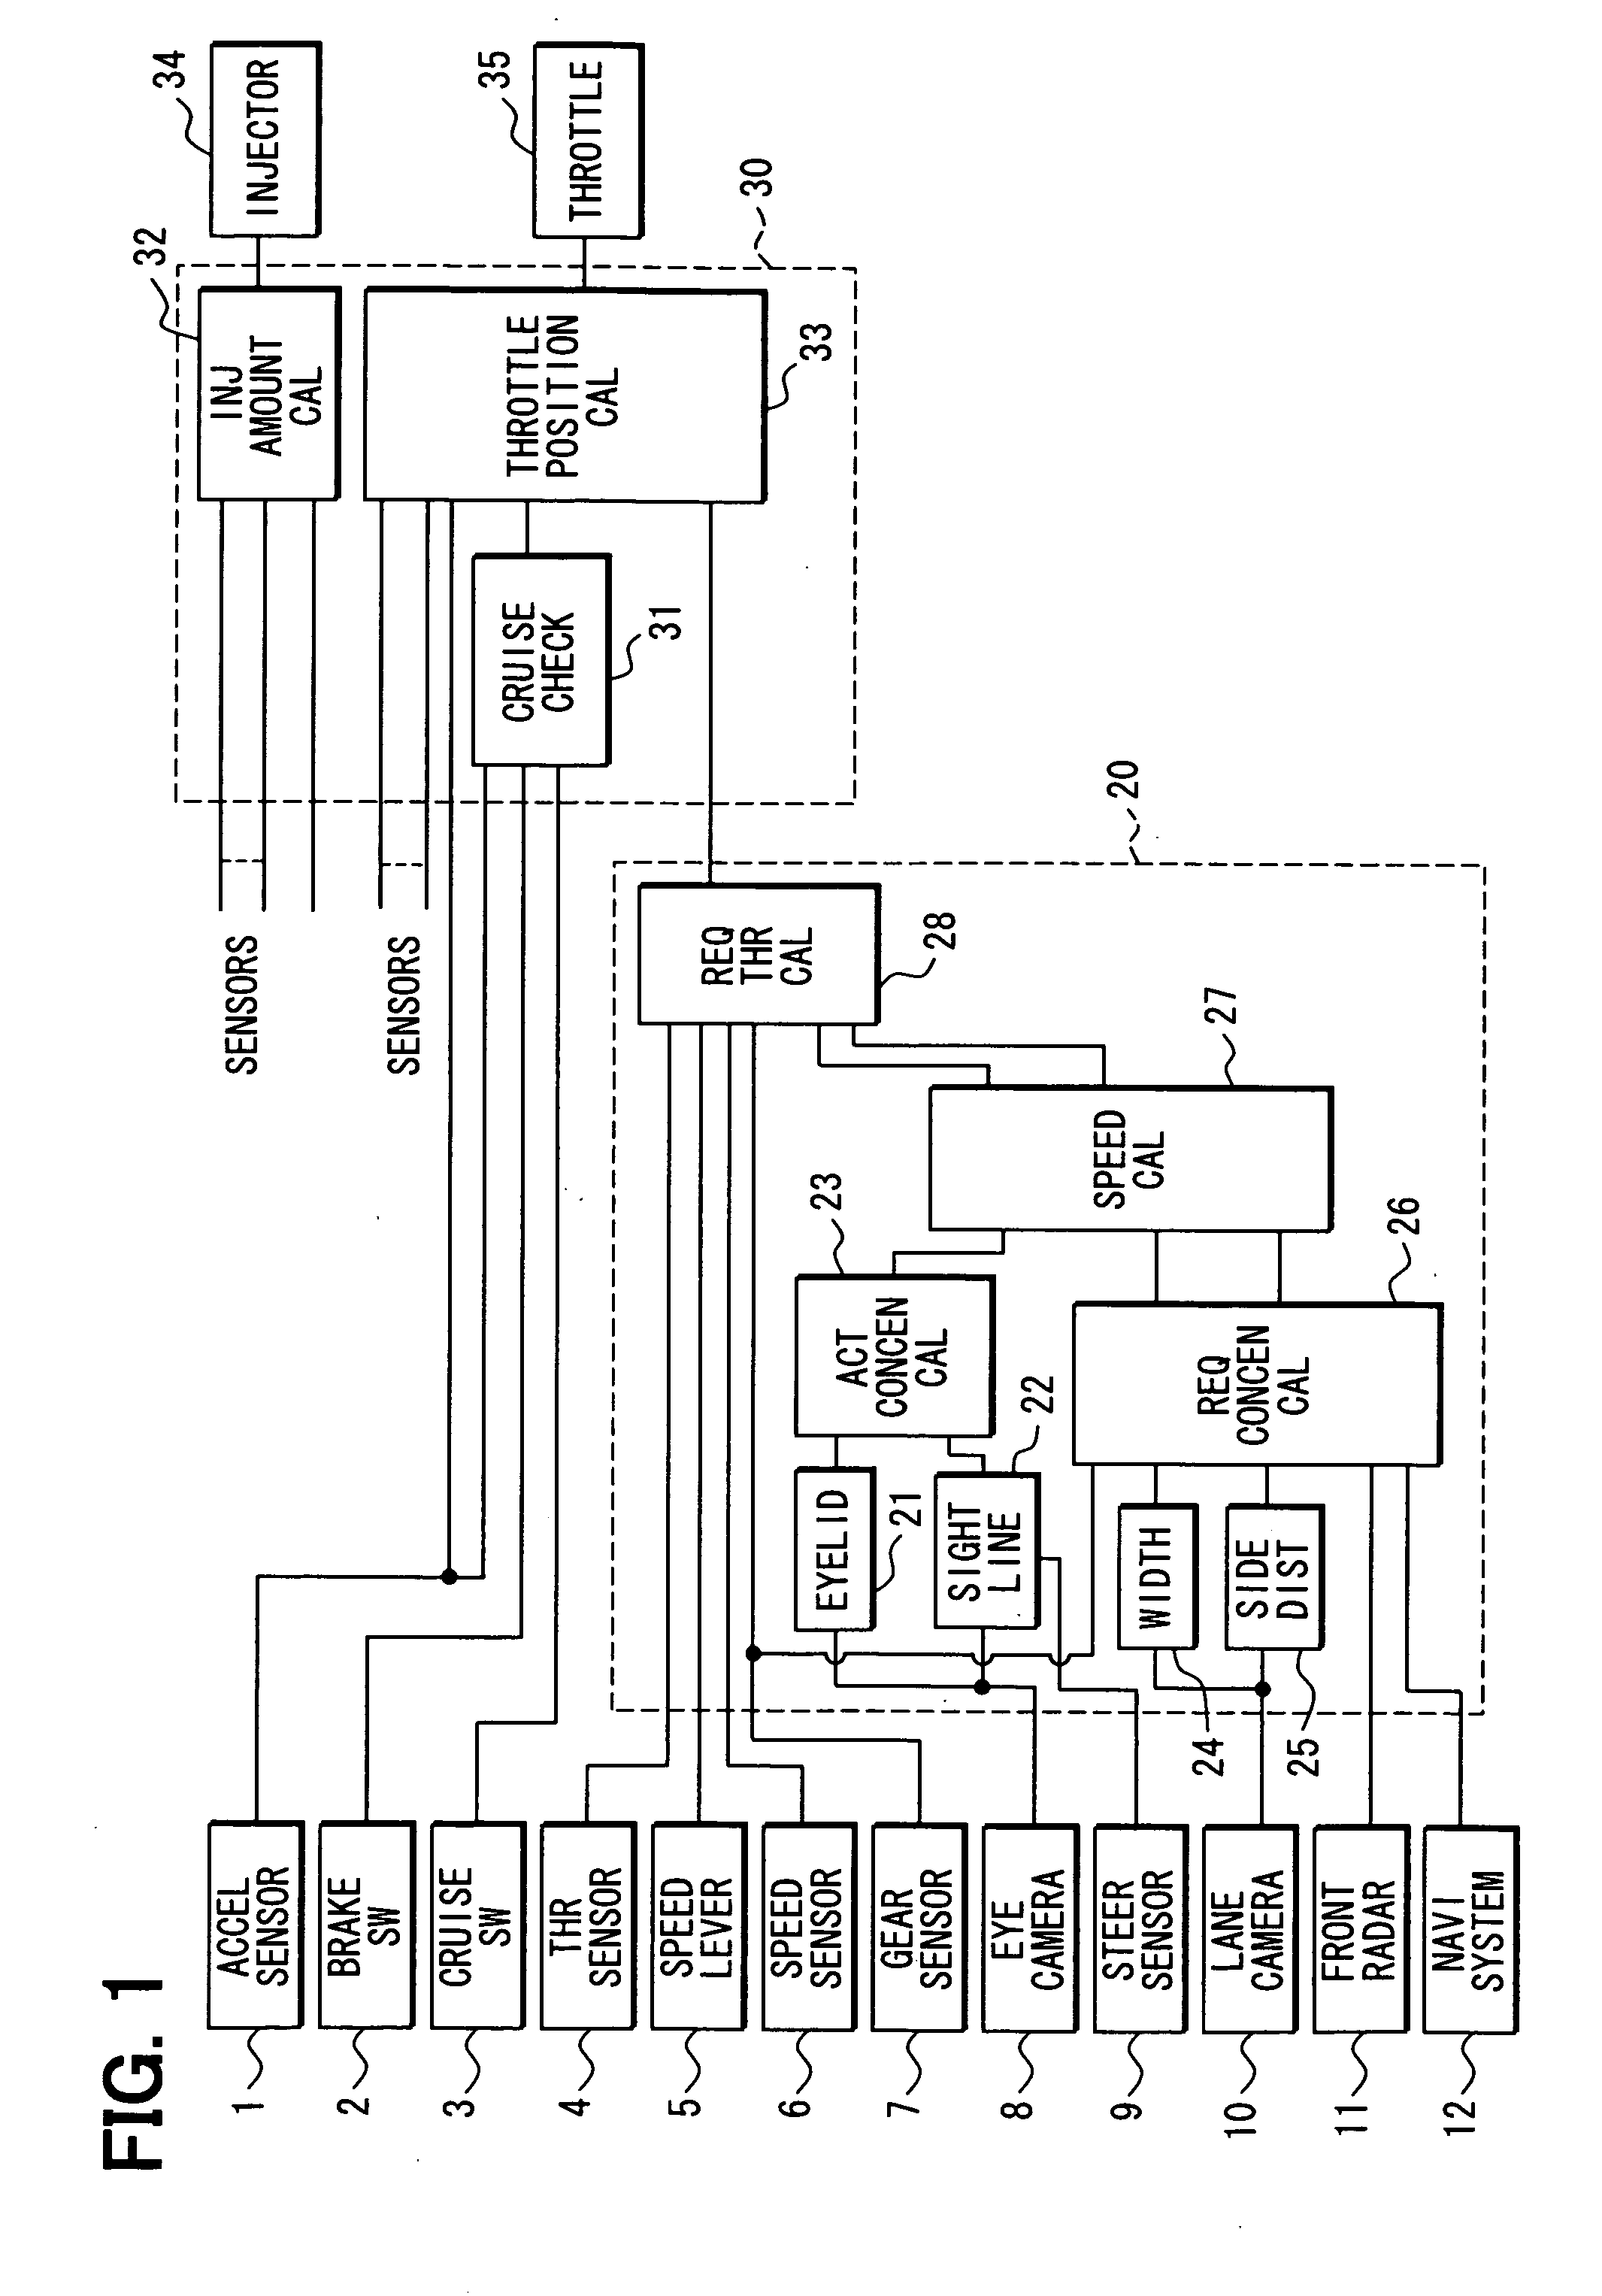 Vehicle travel control system